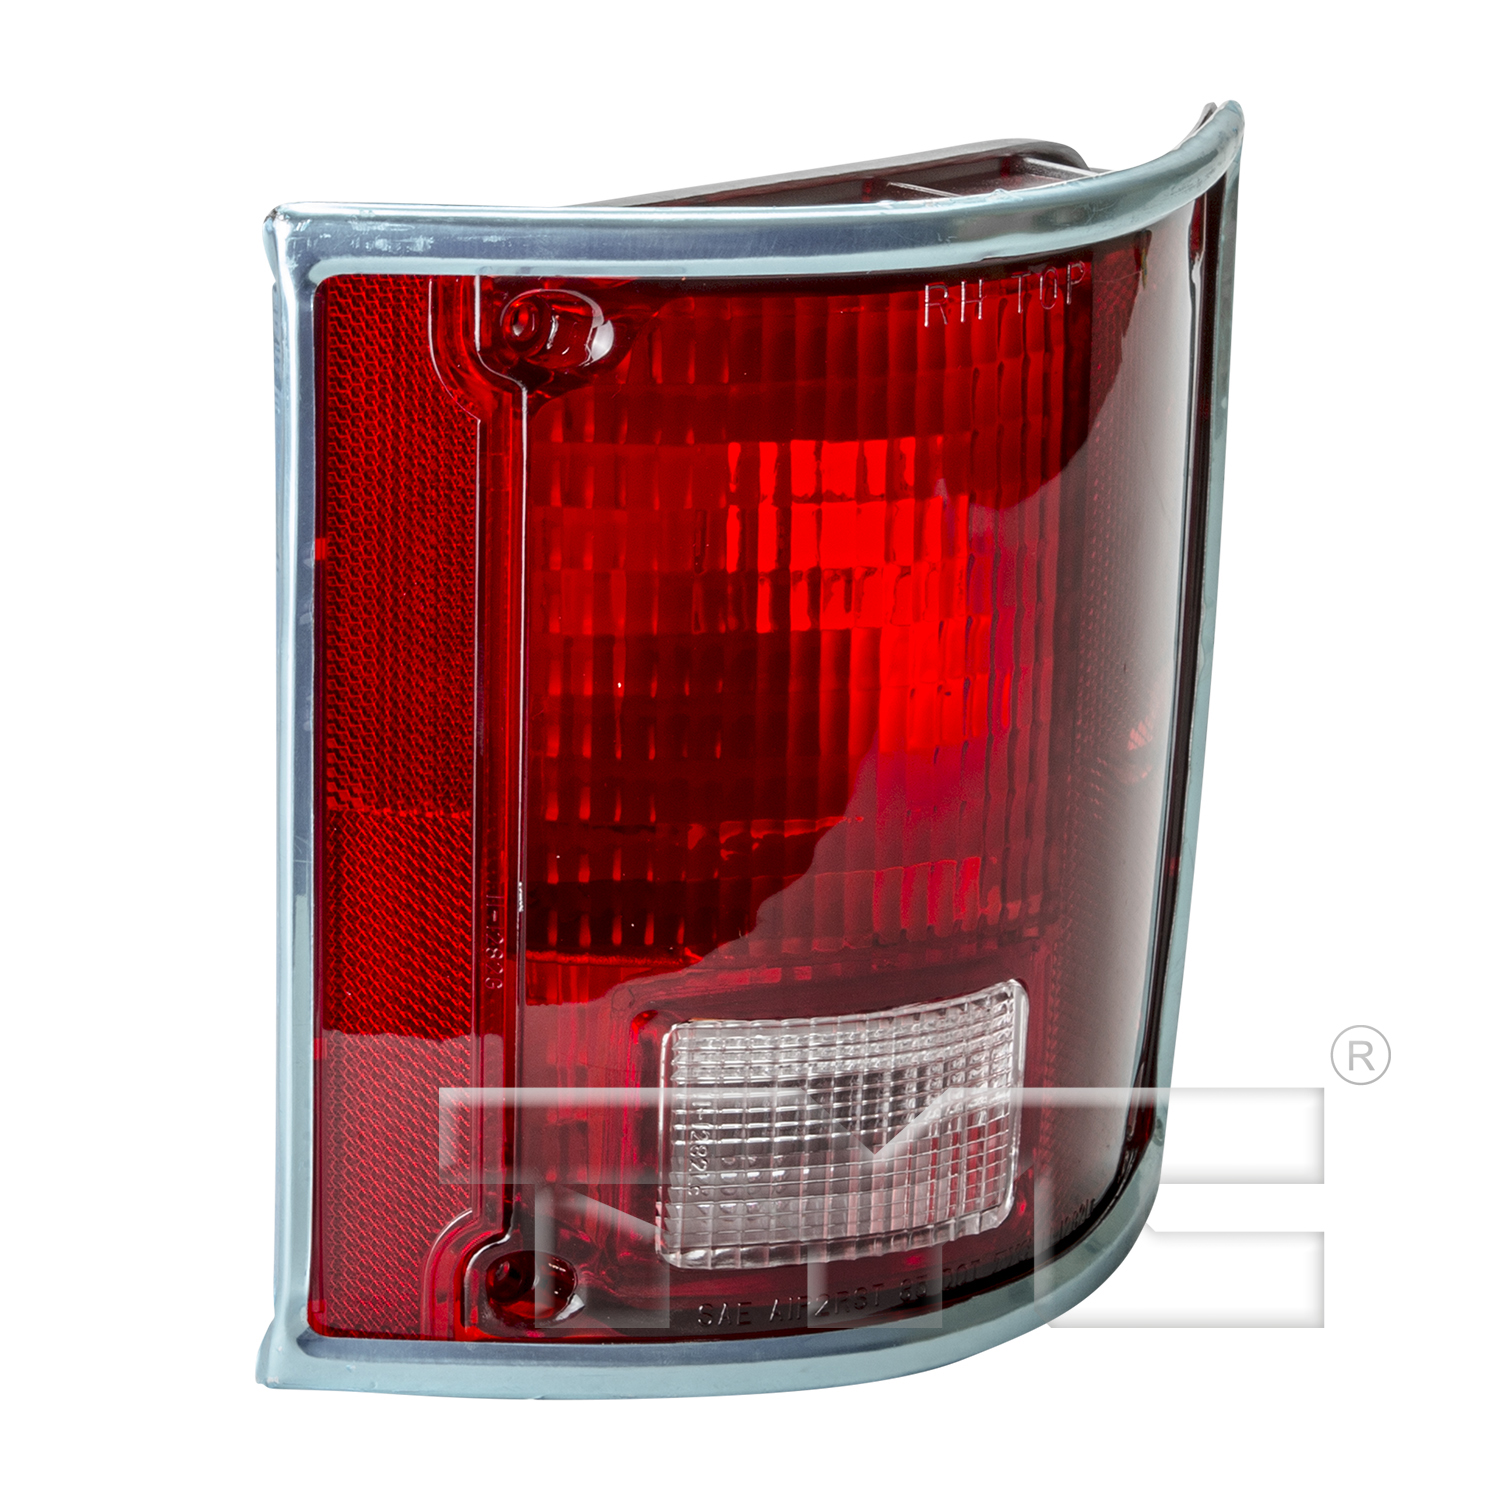 Aftermarket TAILLIGHTS for CHEVROLET - C3500, C3500,88-91,RT Taillamp assy